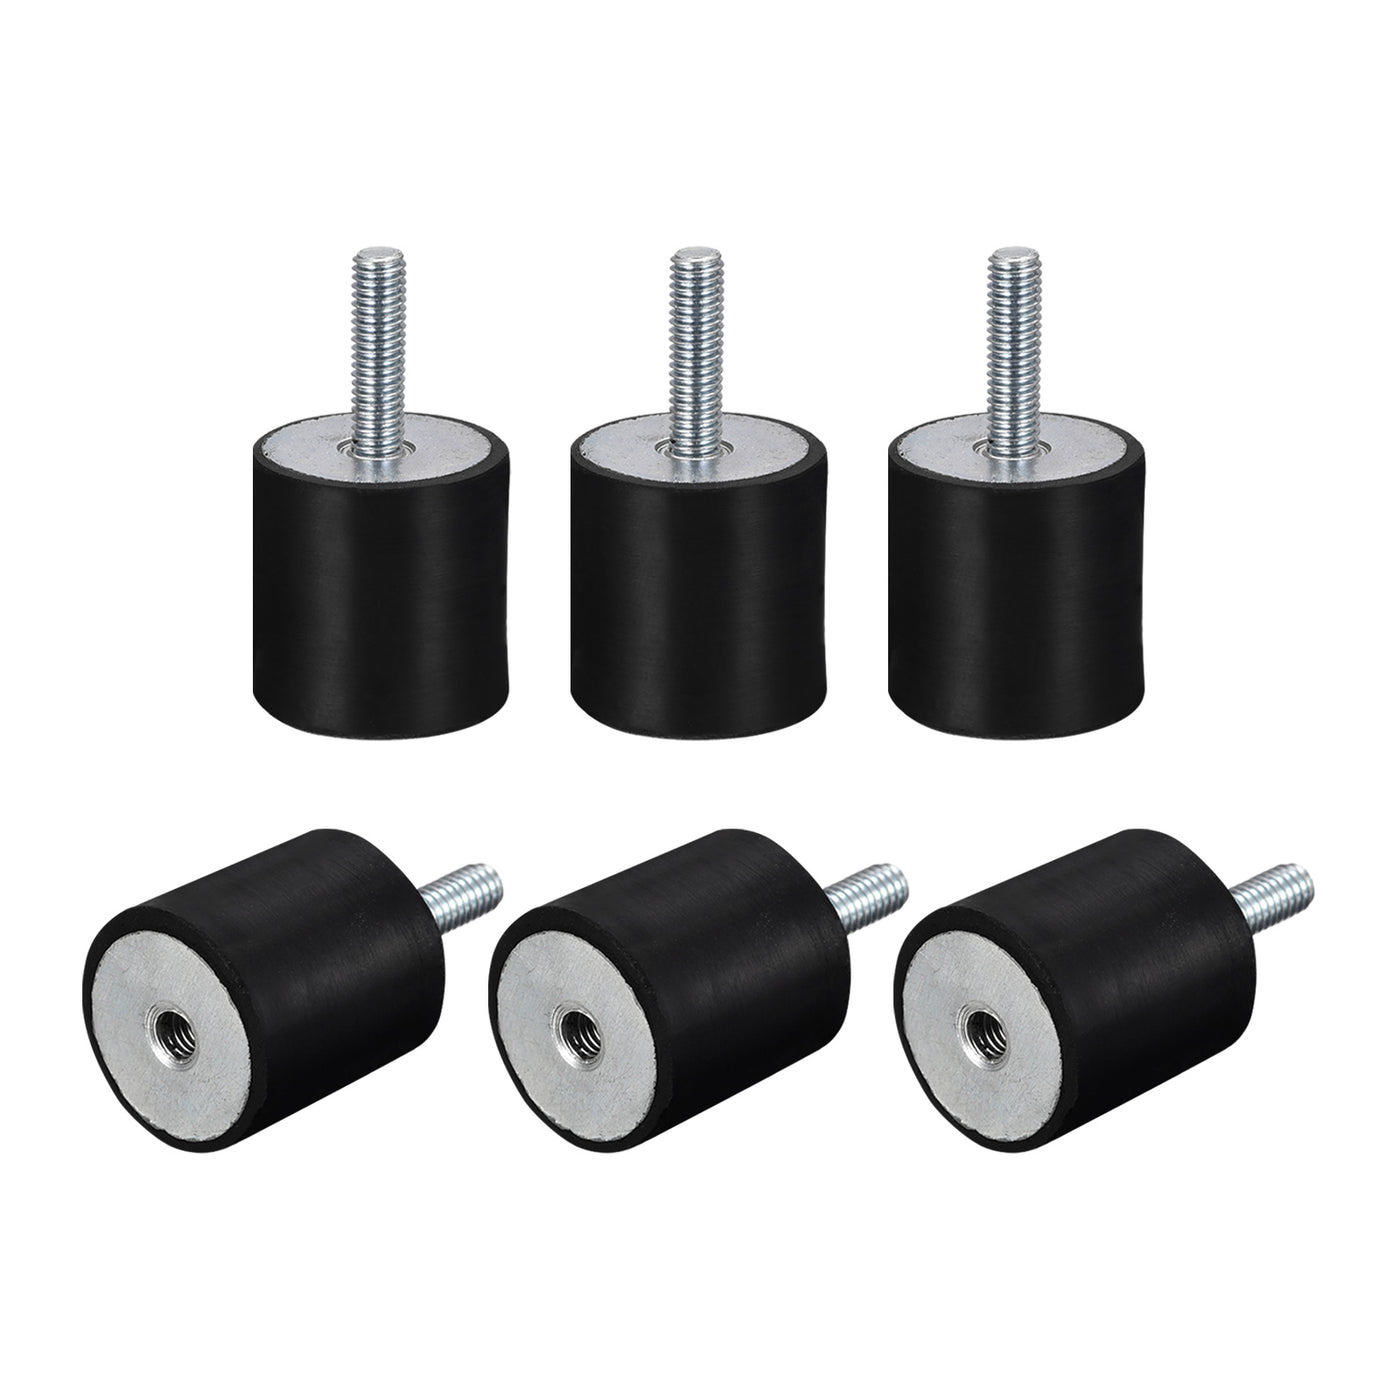 uxcell Uxcell Rubber Mount 6pcs M6 Male/Female Vibration Isolator Shock Absorber, D20mmxH20mm